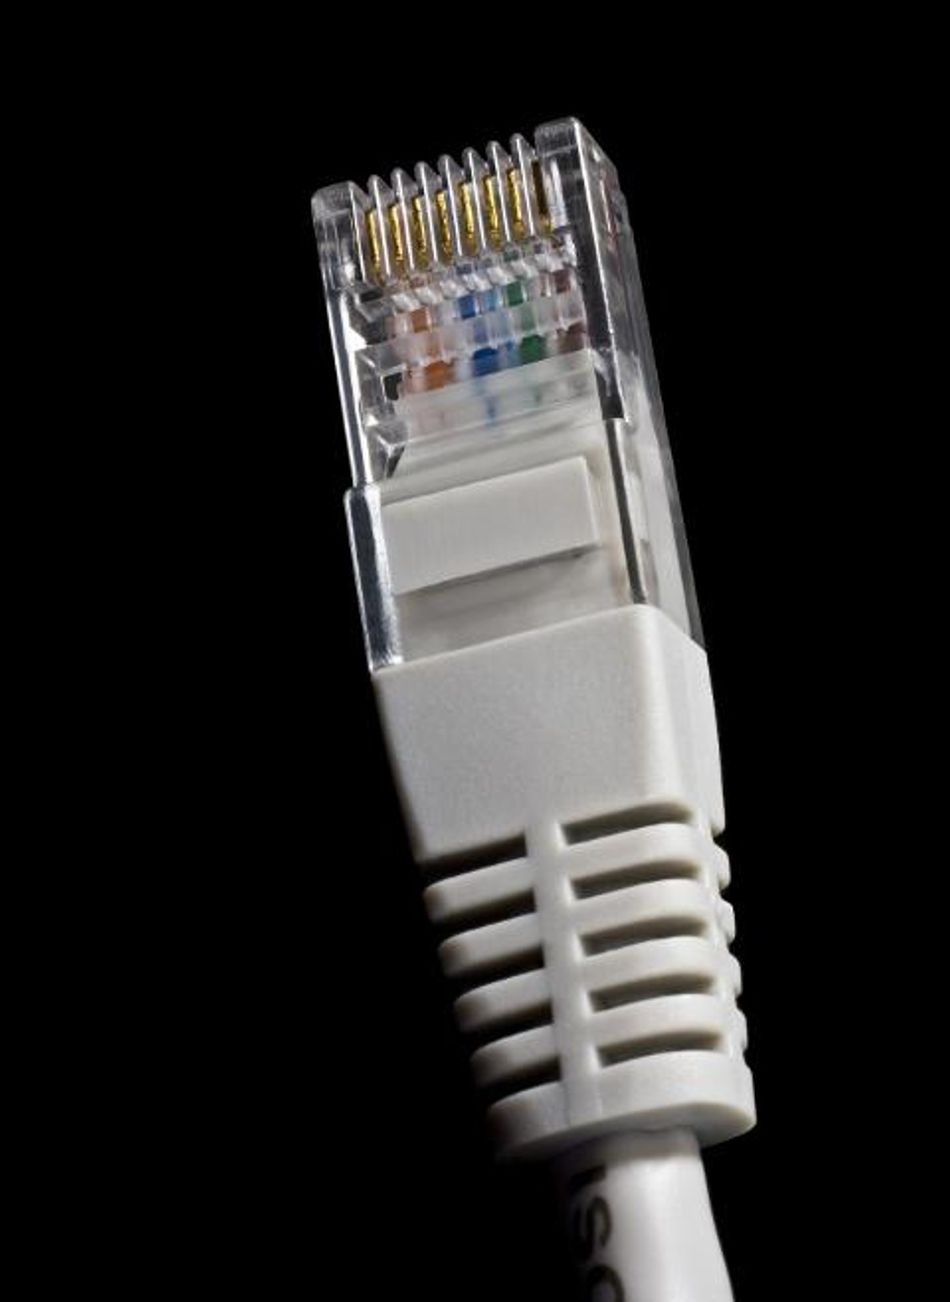 An Ethernet cable used by Modbus TCP/IP Protocol